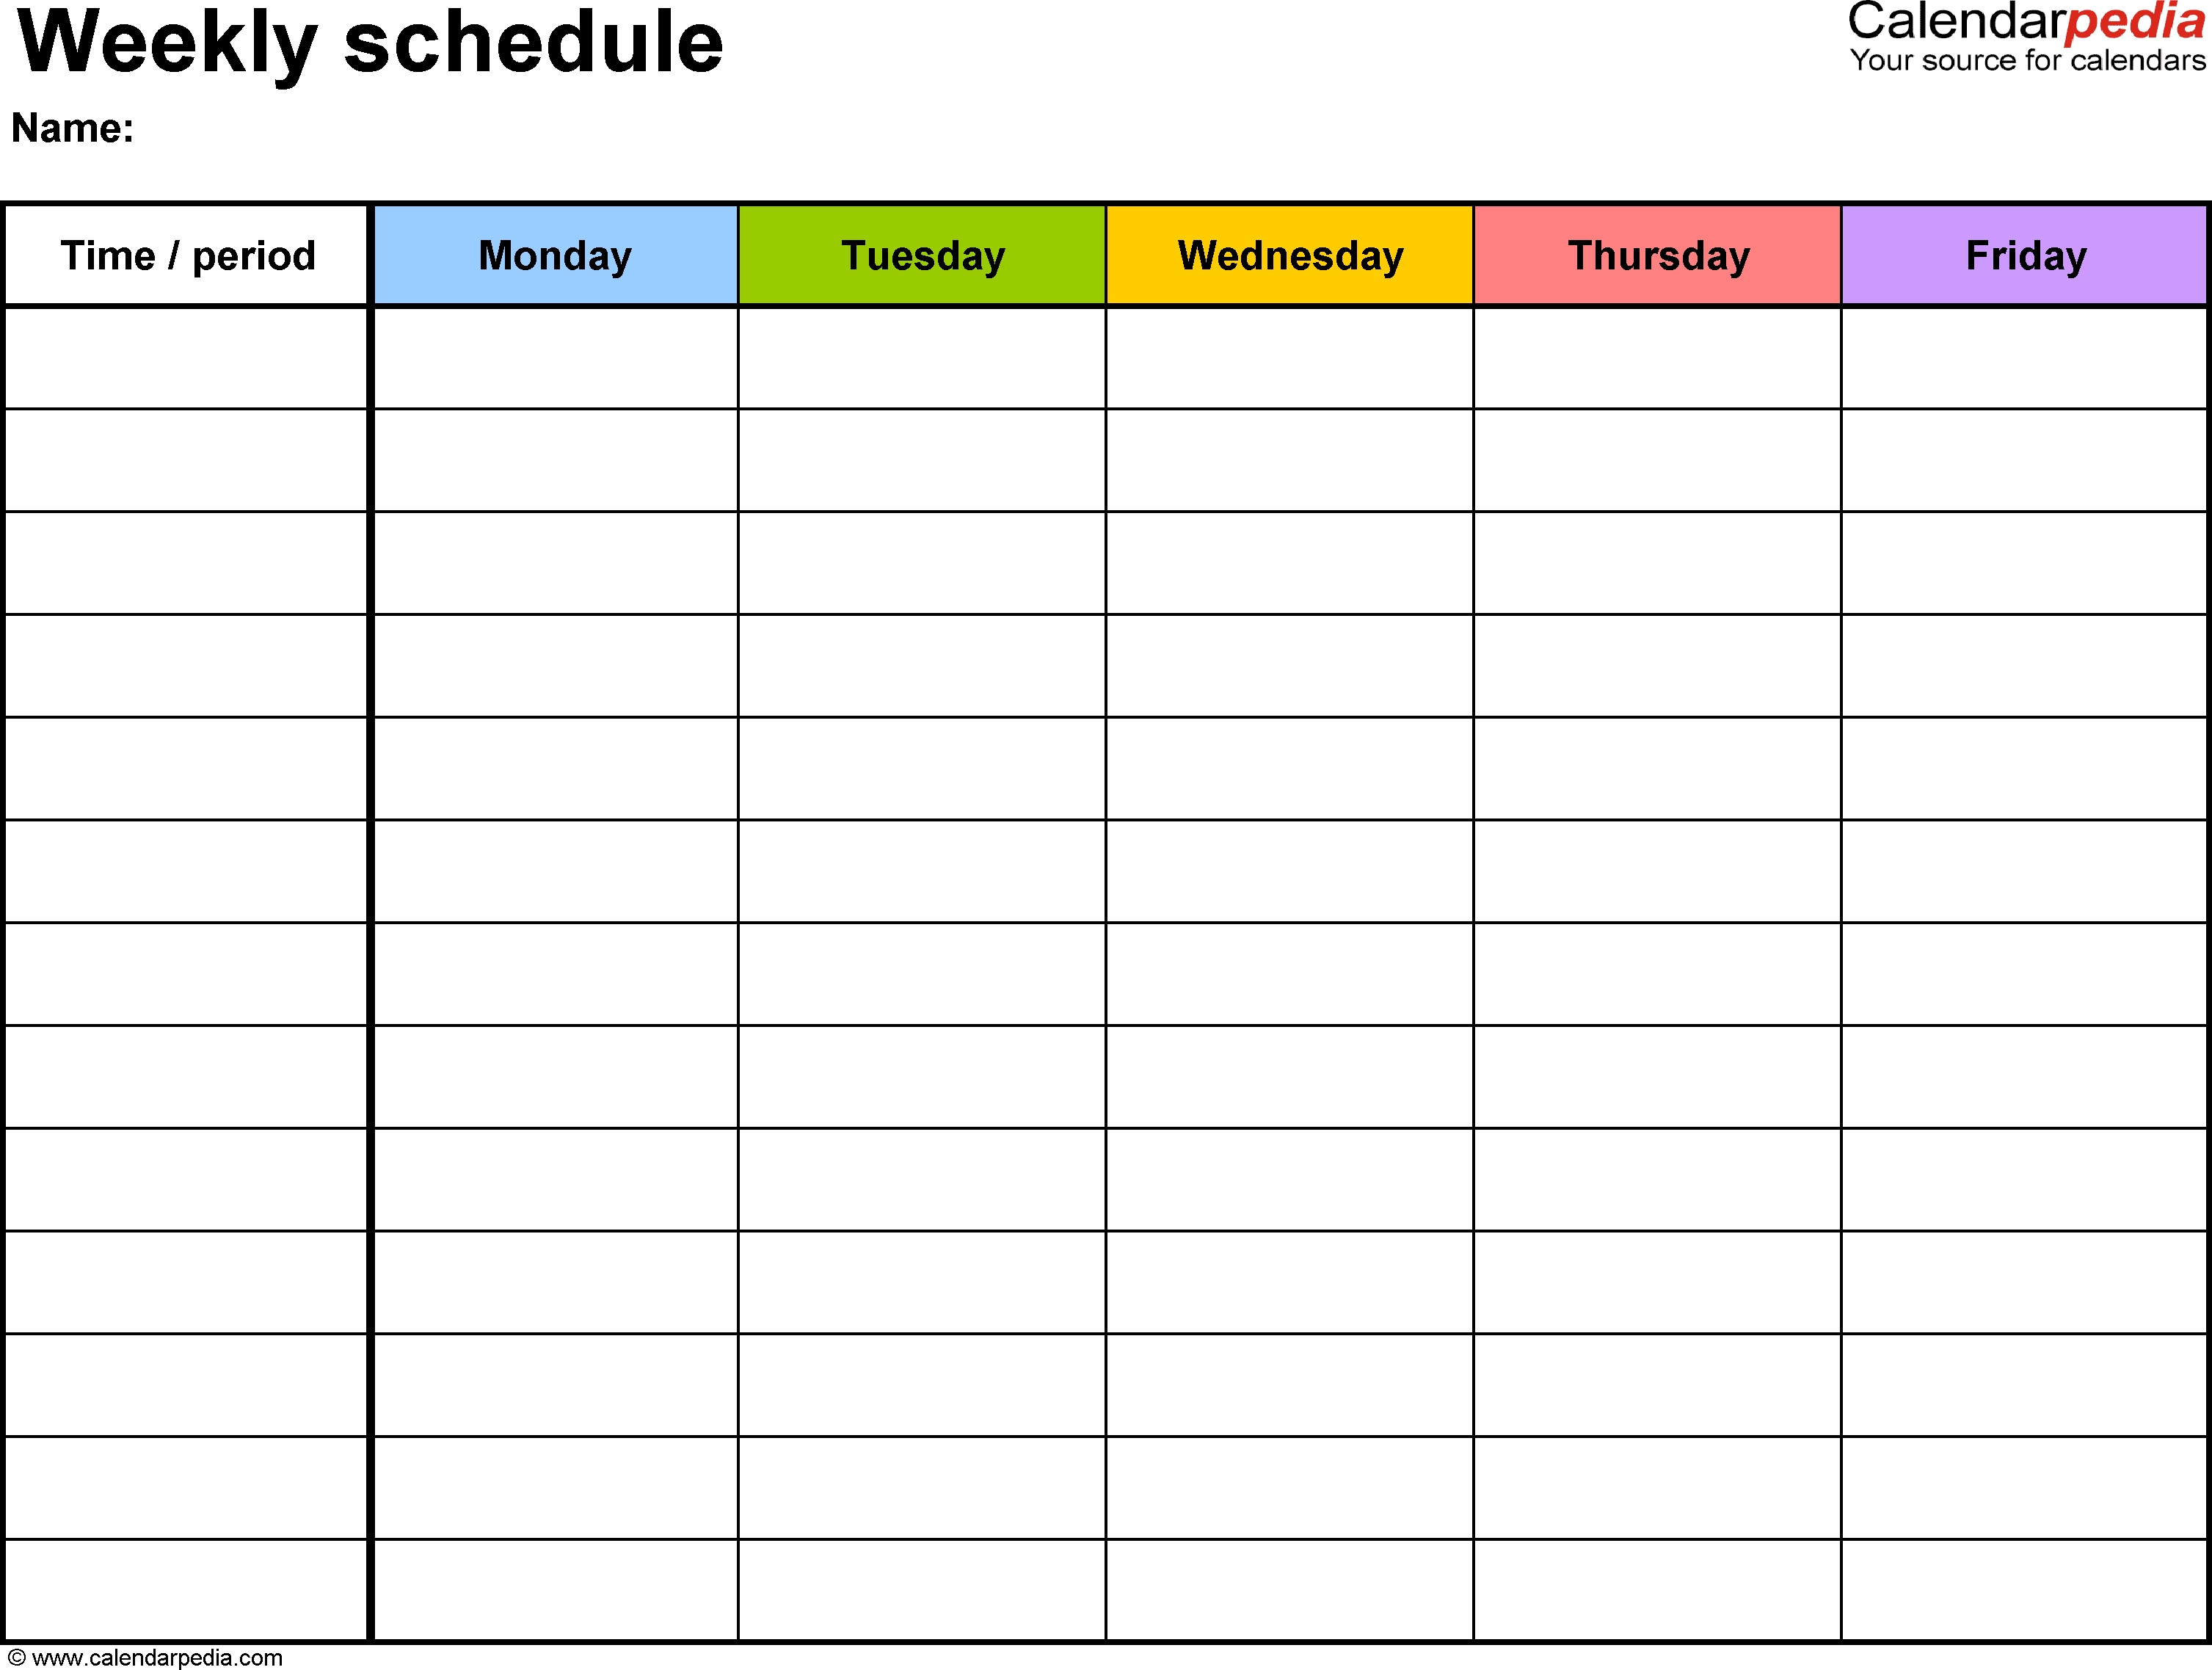 Free Weekly Schedule Templates For Excel - 18 Templates with Blank 12 Hour Shift Schedule Templates